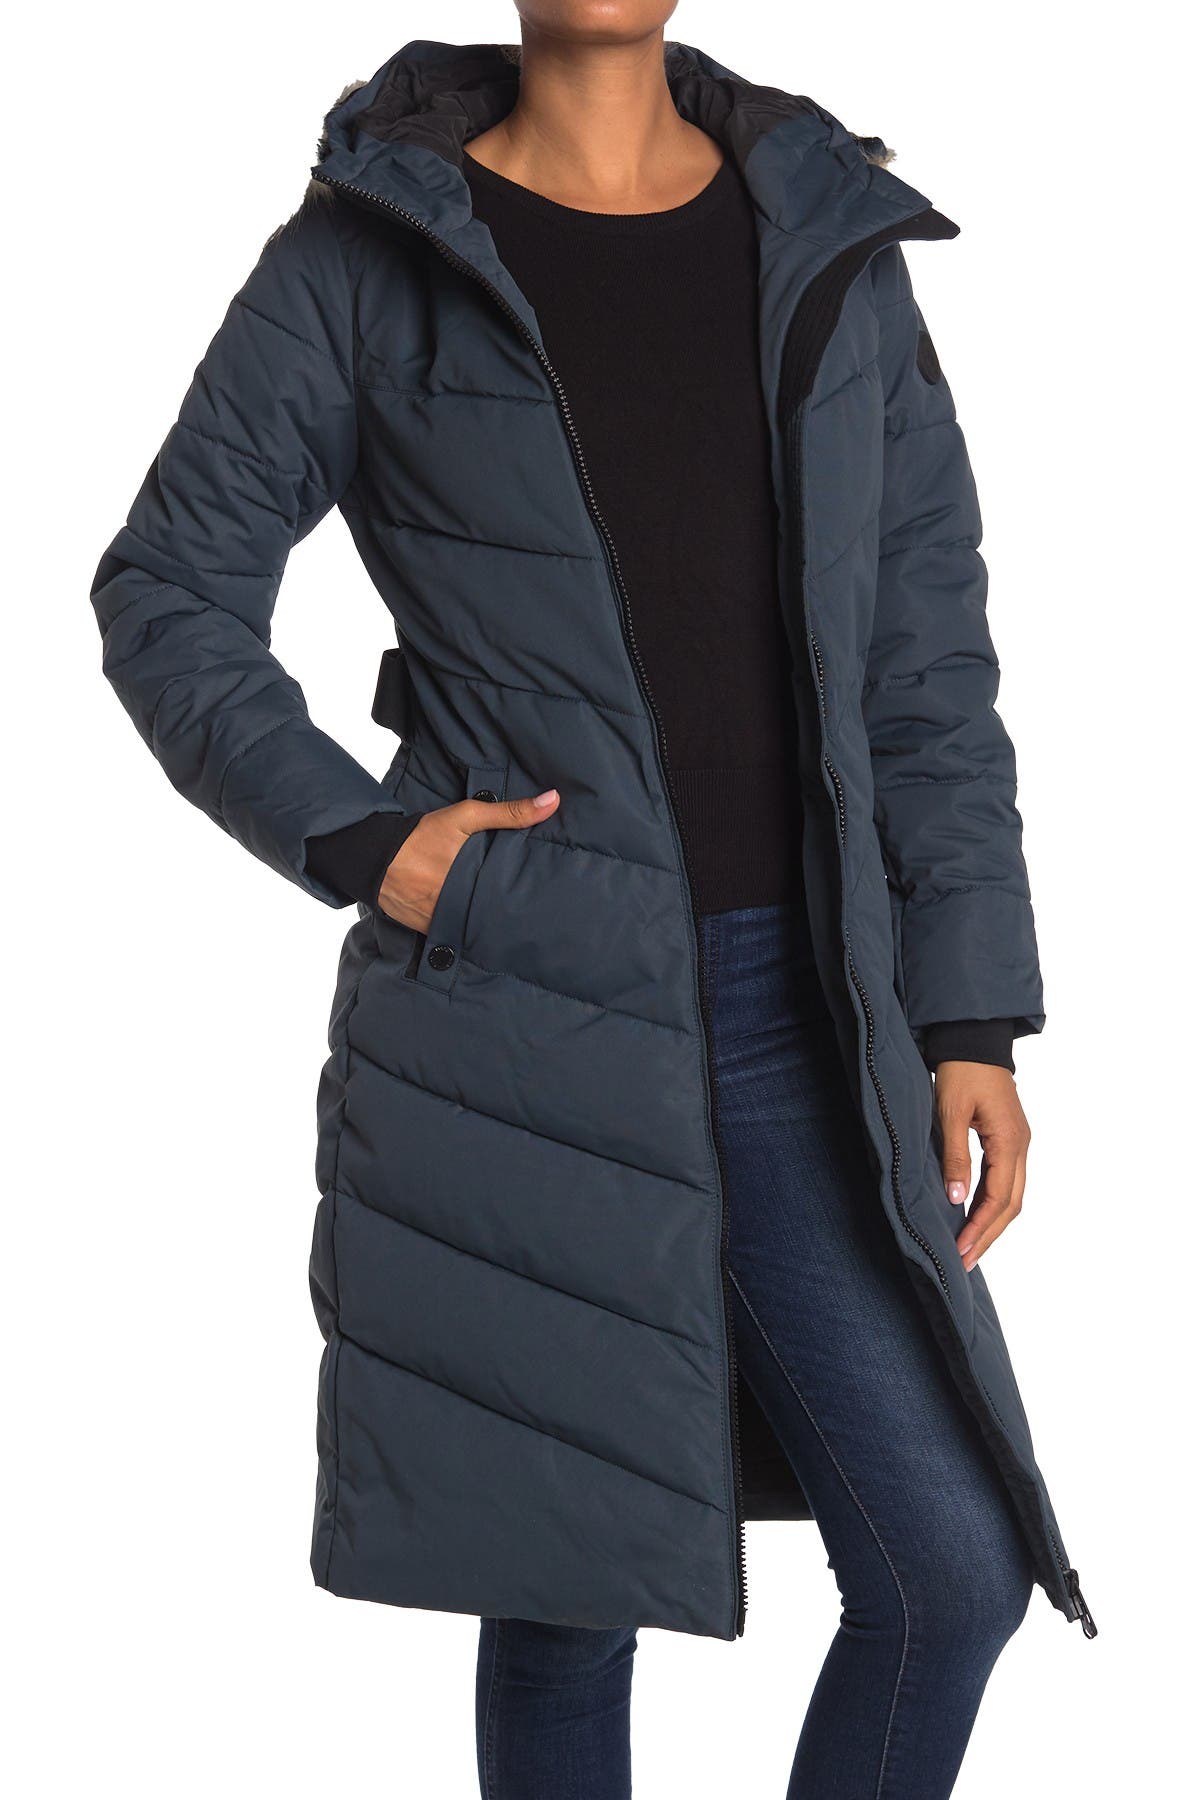 NOIZE | Capri Faux Fur Hooded Quilted Parka | Nordstrom Rack